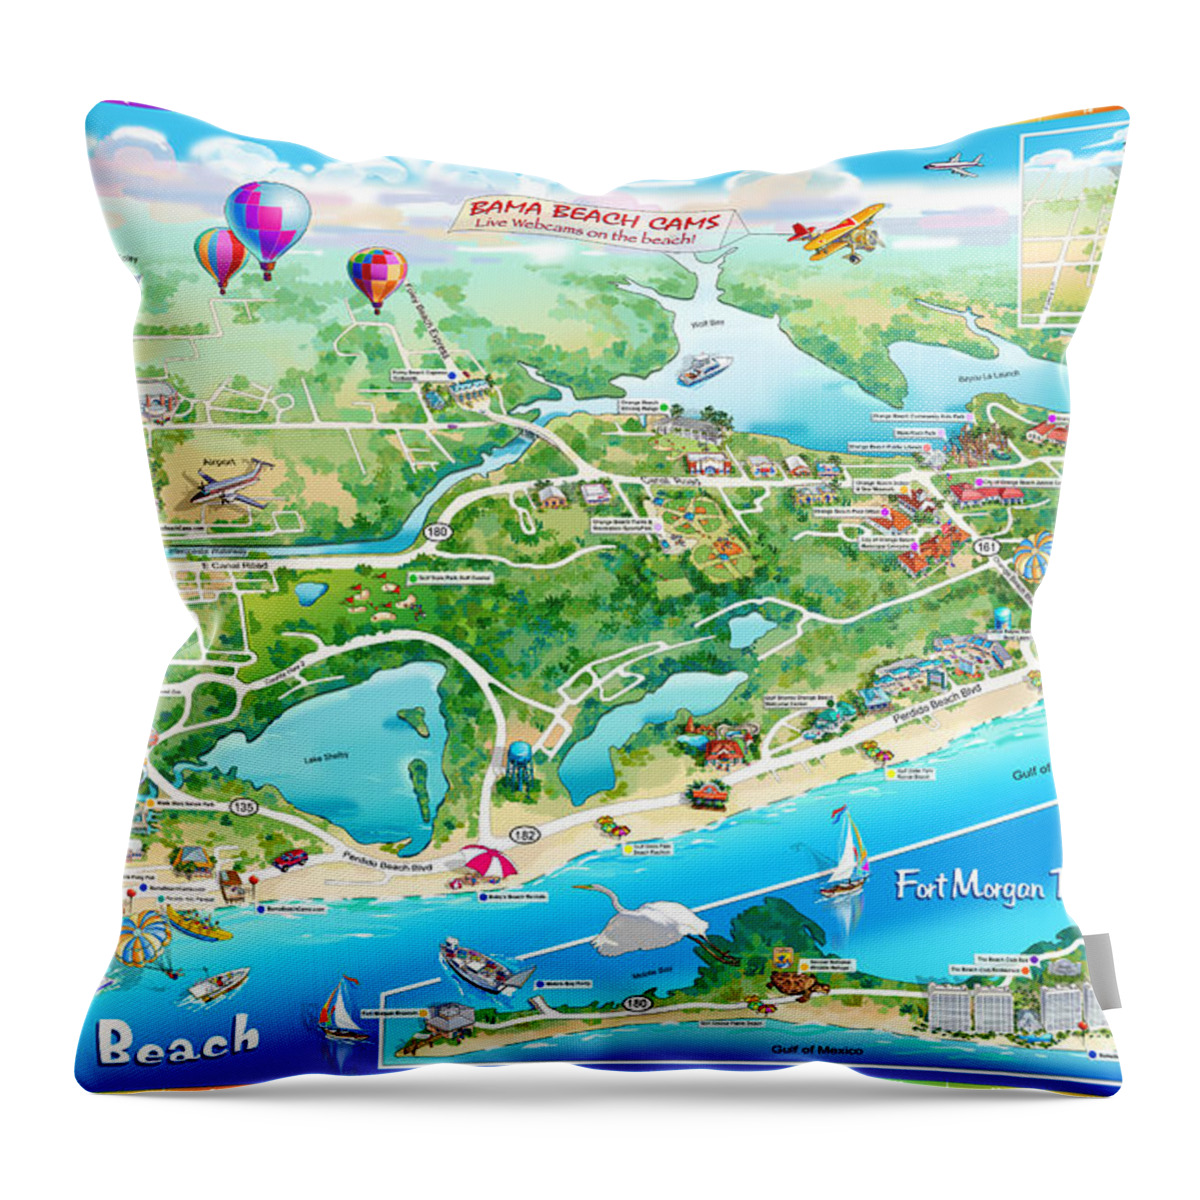 Alabama Beach Illustrated Map Throw Pillow featuring the painting Alabama Beach Illustrated Map by Maria Rabinky